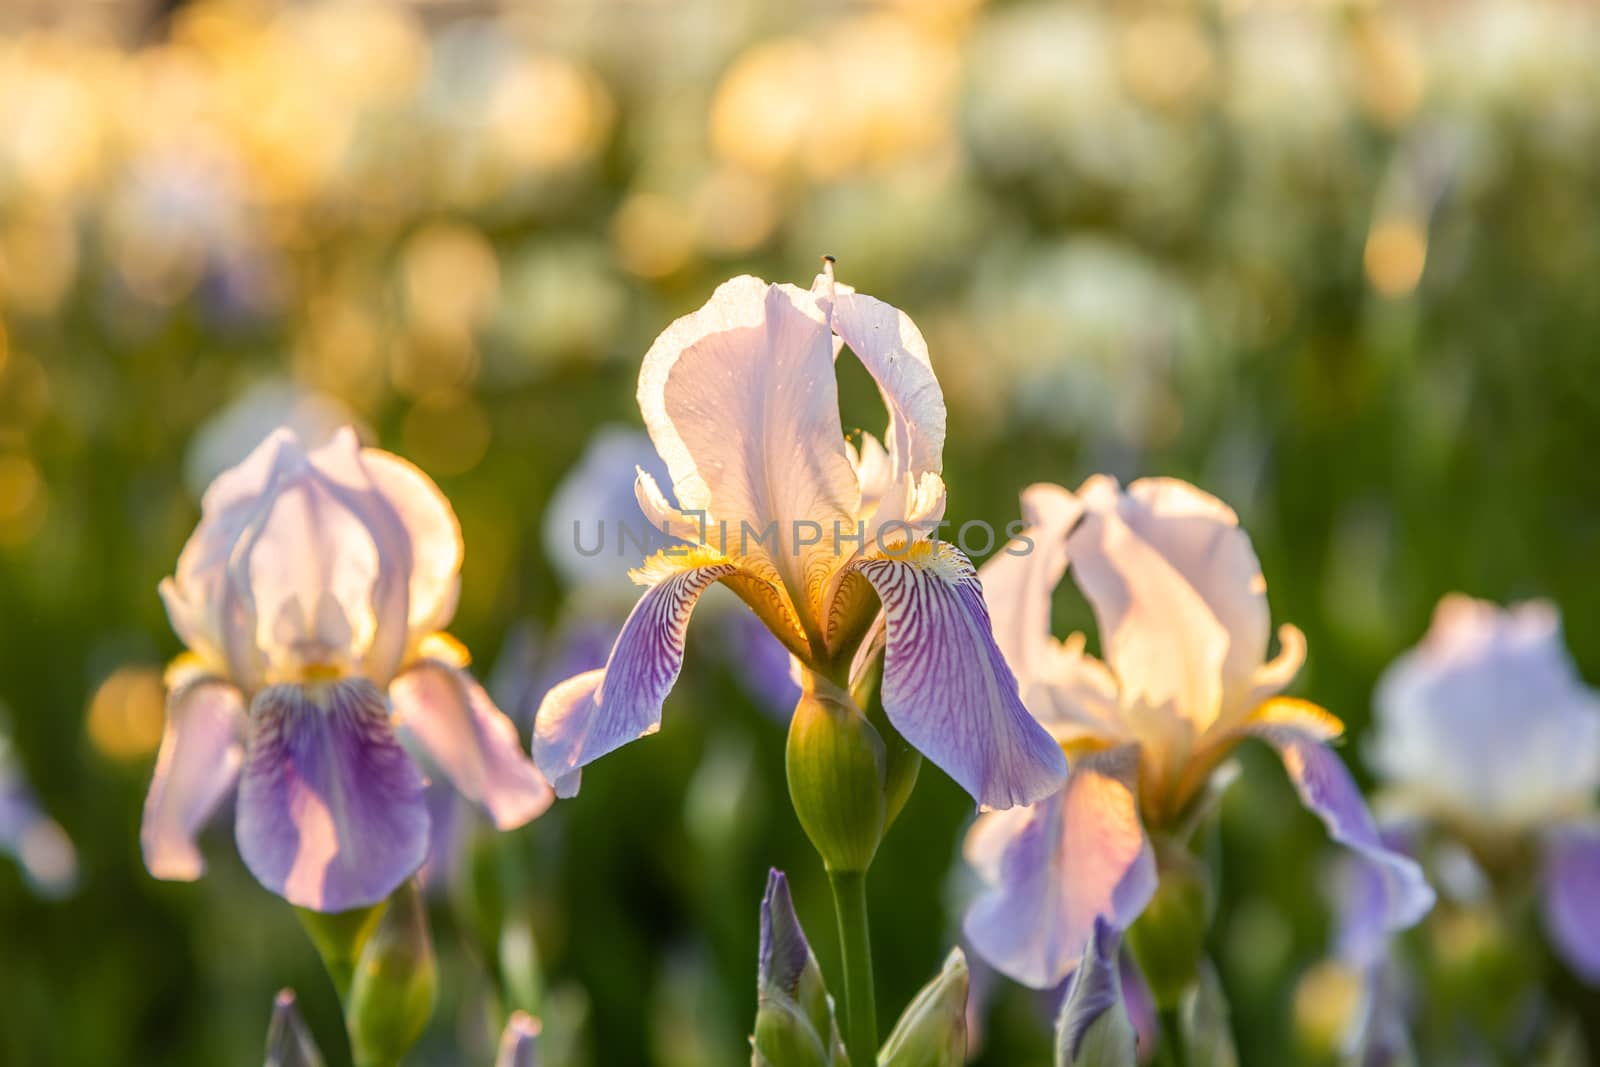 lilac irises flowers on the field in the sunlight by sveter